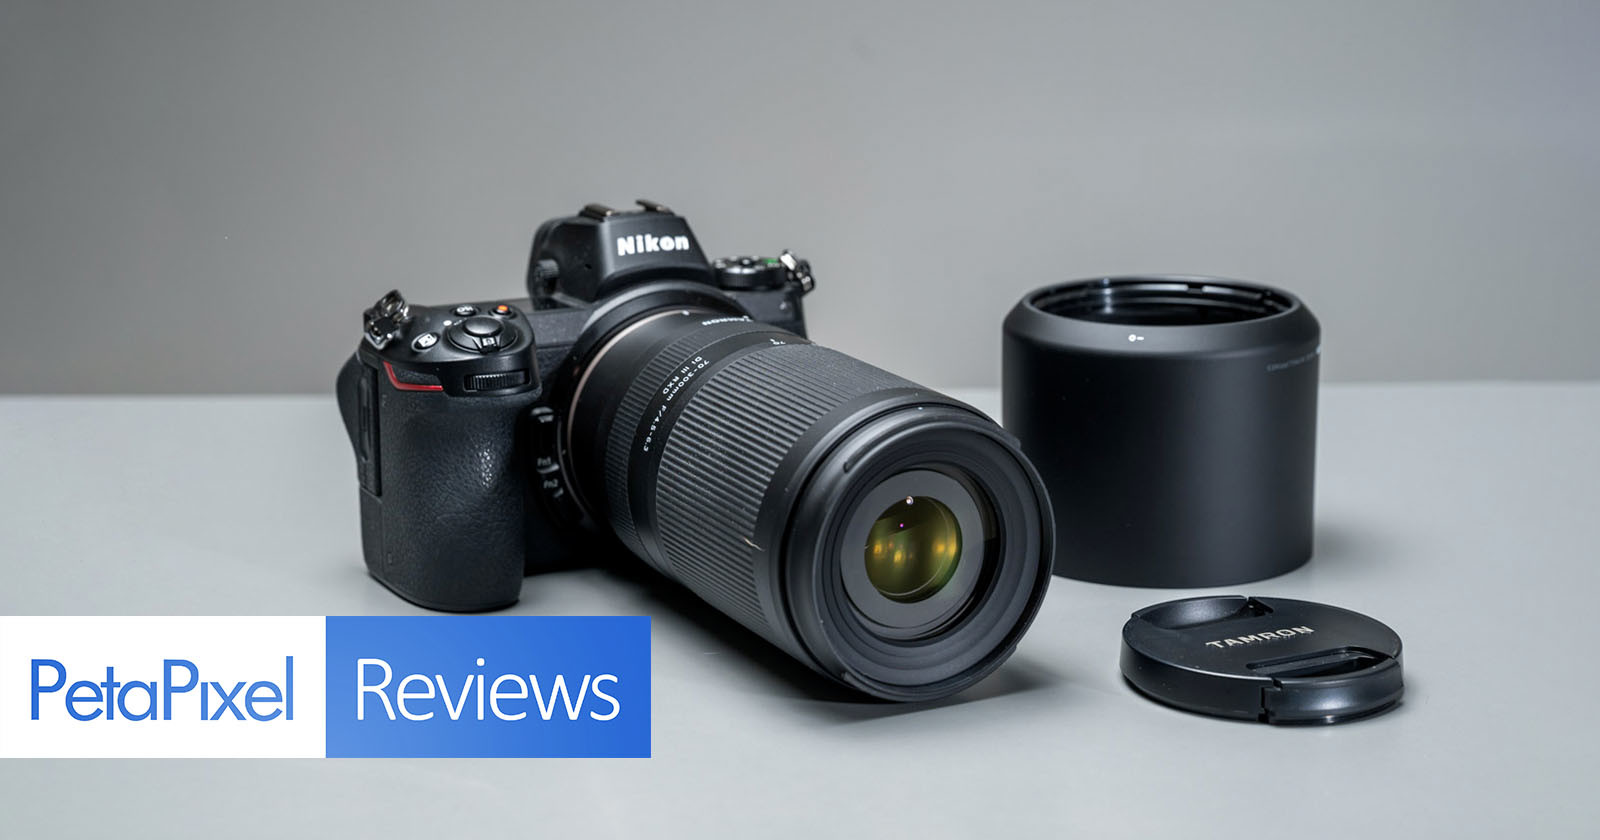 Tamron 70-300mm f/4.5-6.3 Di III RXD Review: Telephoto For